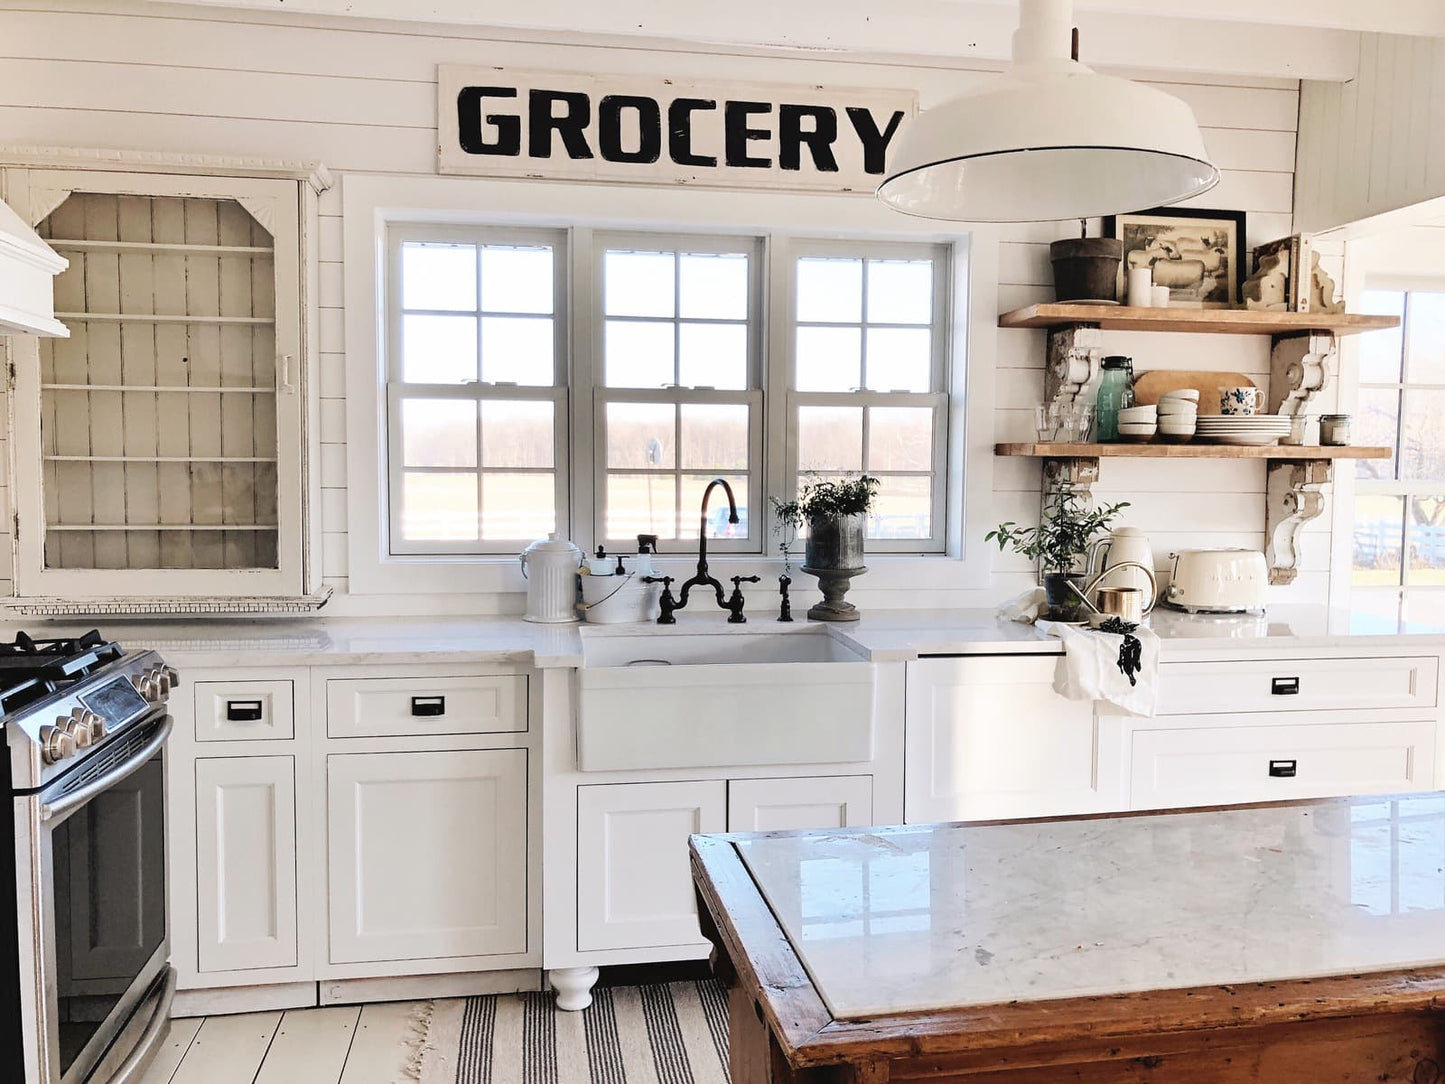 Falling in love with Liz Marie's article on "Cottage Style Kitchen Shelves: To Paint or Stain?